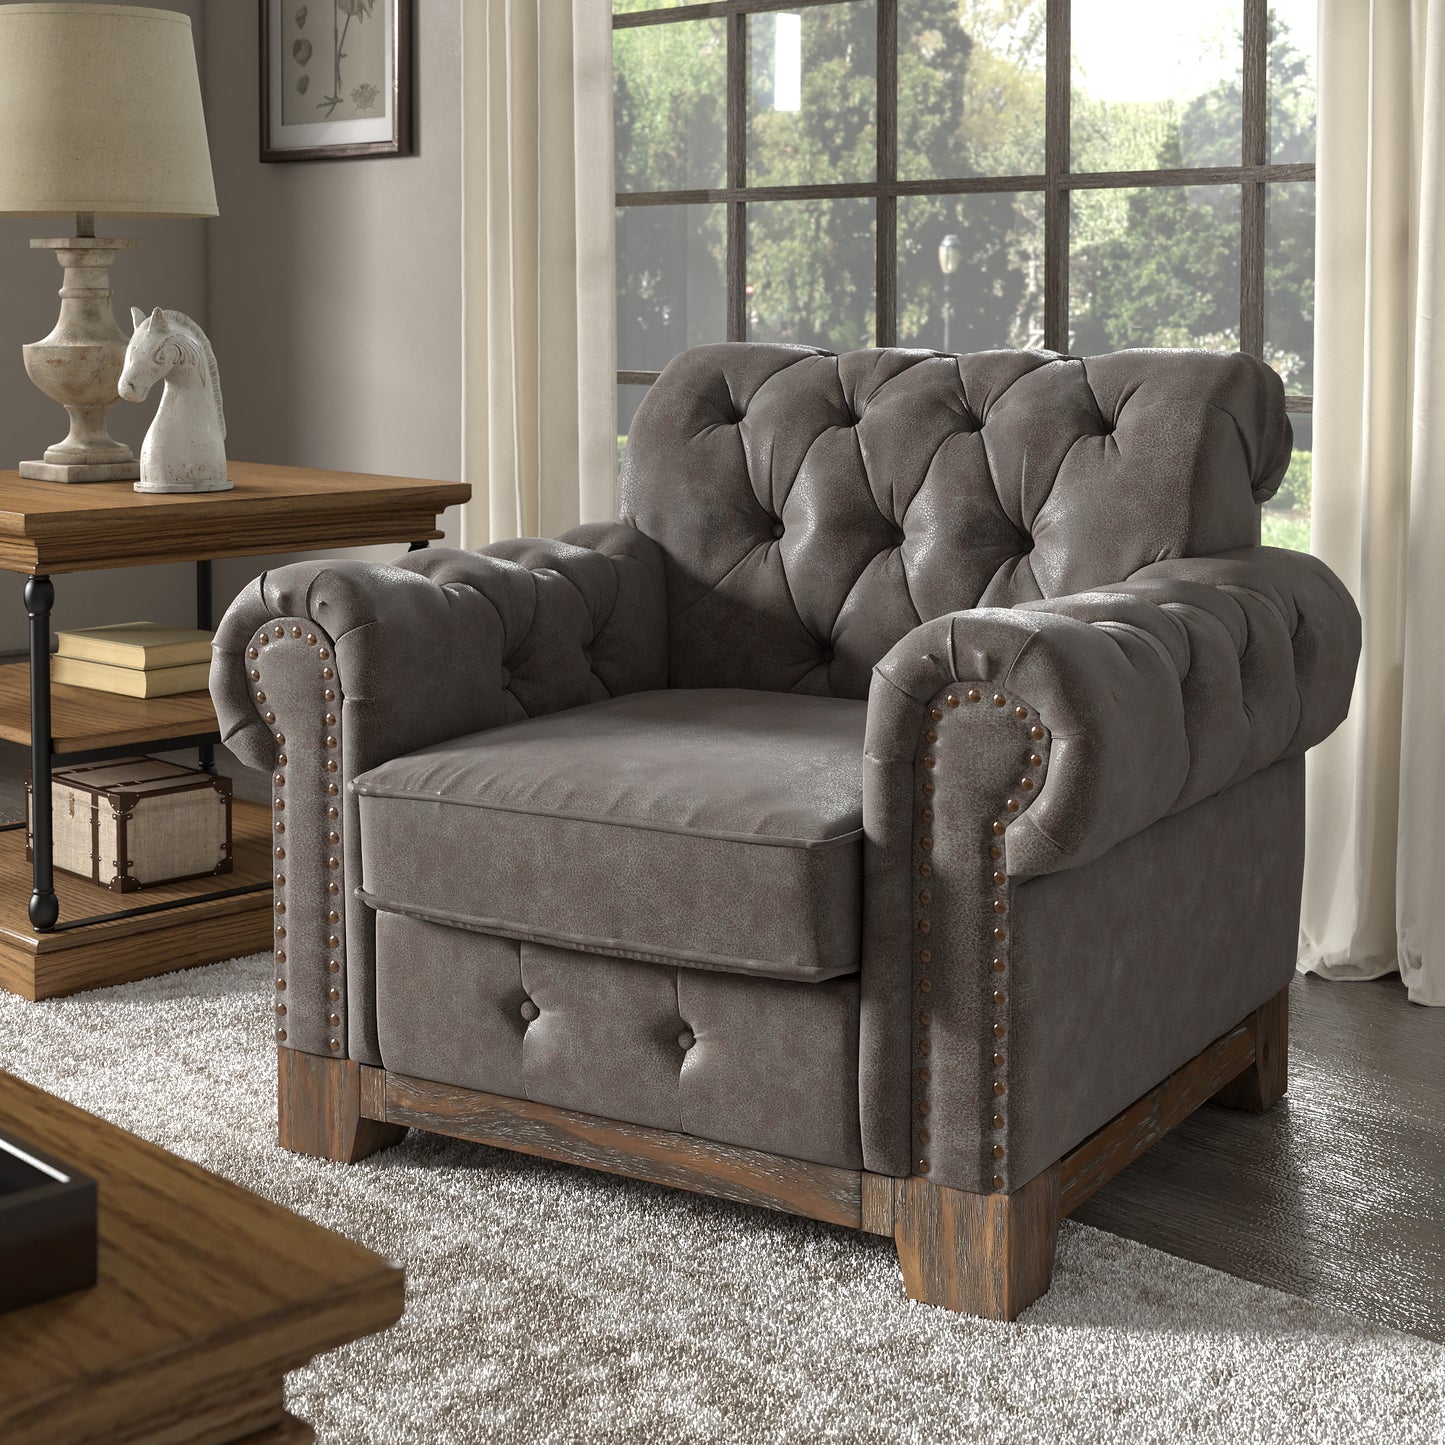 Tufted Rolled Arm Chesterfield Chair - Grey Polished Microfiber